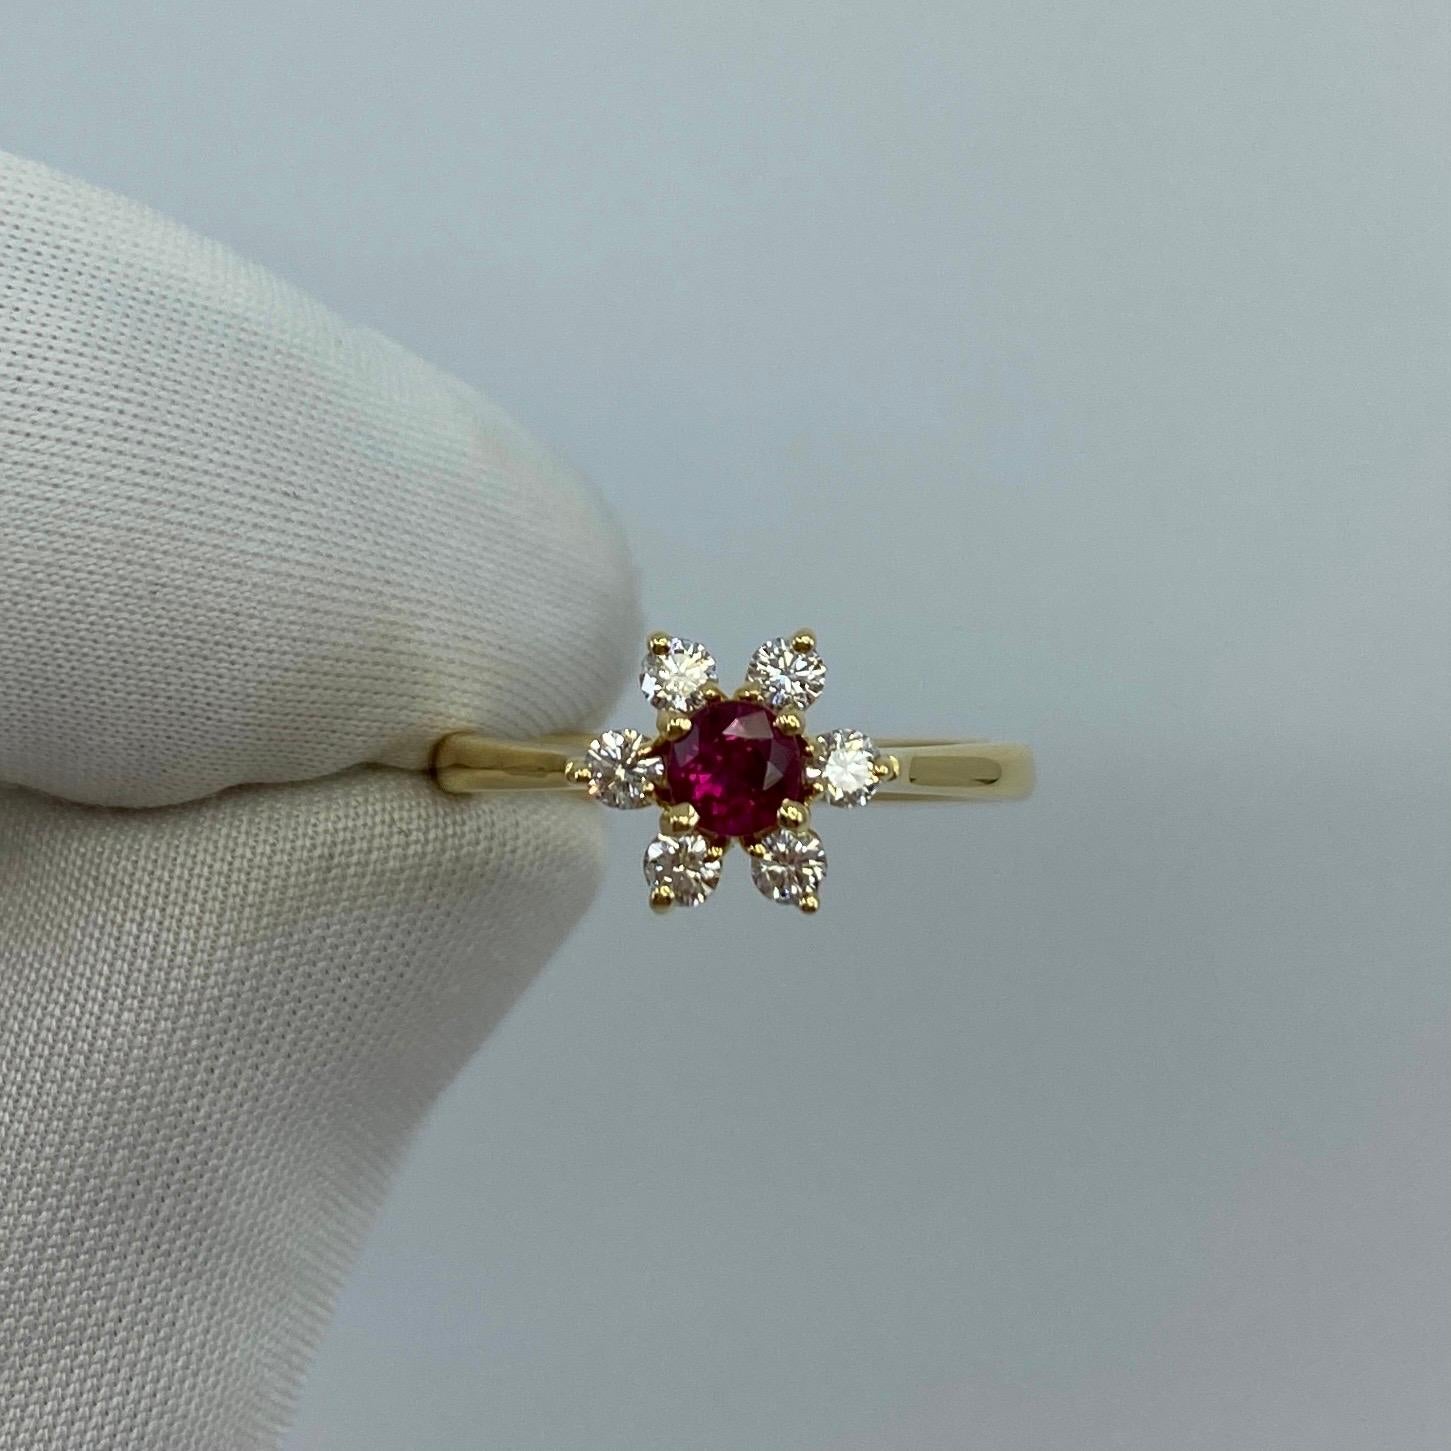 Rare Tiffany & Co. Ruby & Diamond Buttercup 18k Yellow Gold Ring.

A beautifully made yellow gold cluster ring set with a stunning 3.3mm (approx. 0.33ct) deep red round cut ruby. Superb colour, clarity and cut. Surrounded by 6 white diamonds 2.2mm